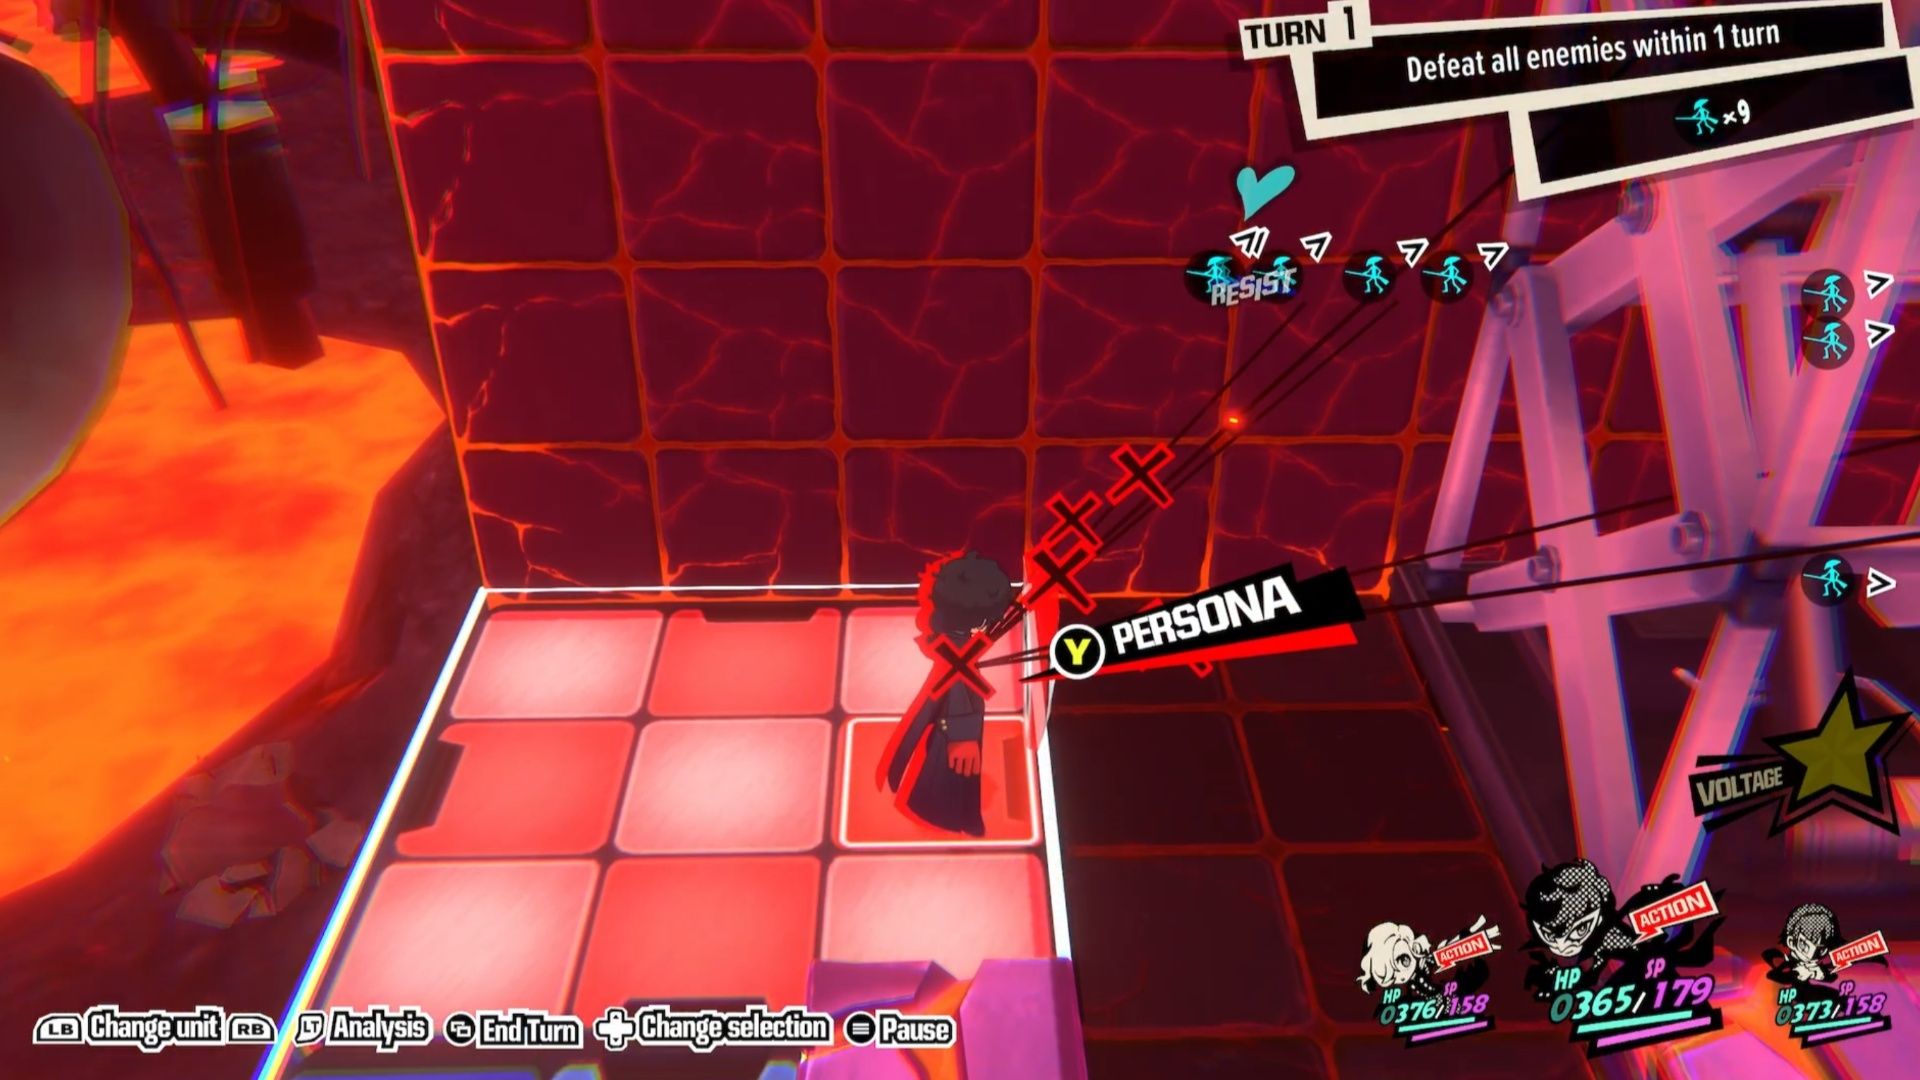 Joker stands on a red platform to prepare to go to the upper level during Quest 12 in Persona 5 Tactica.